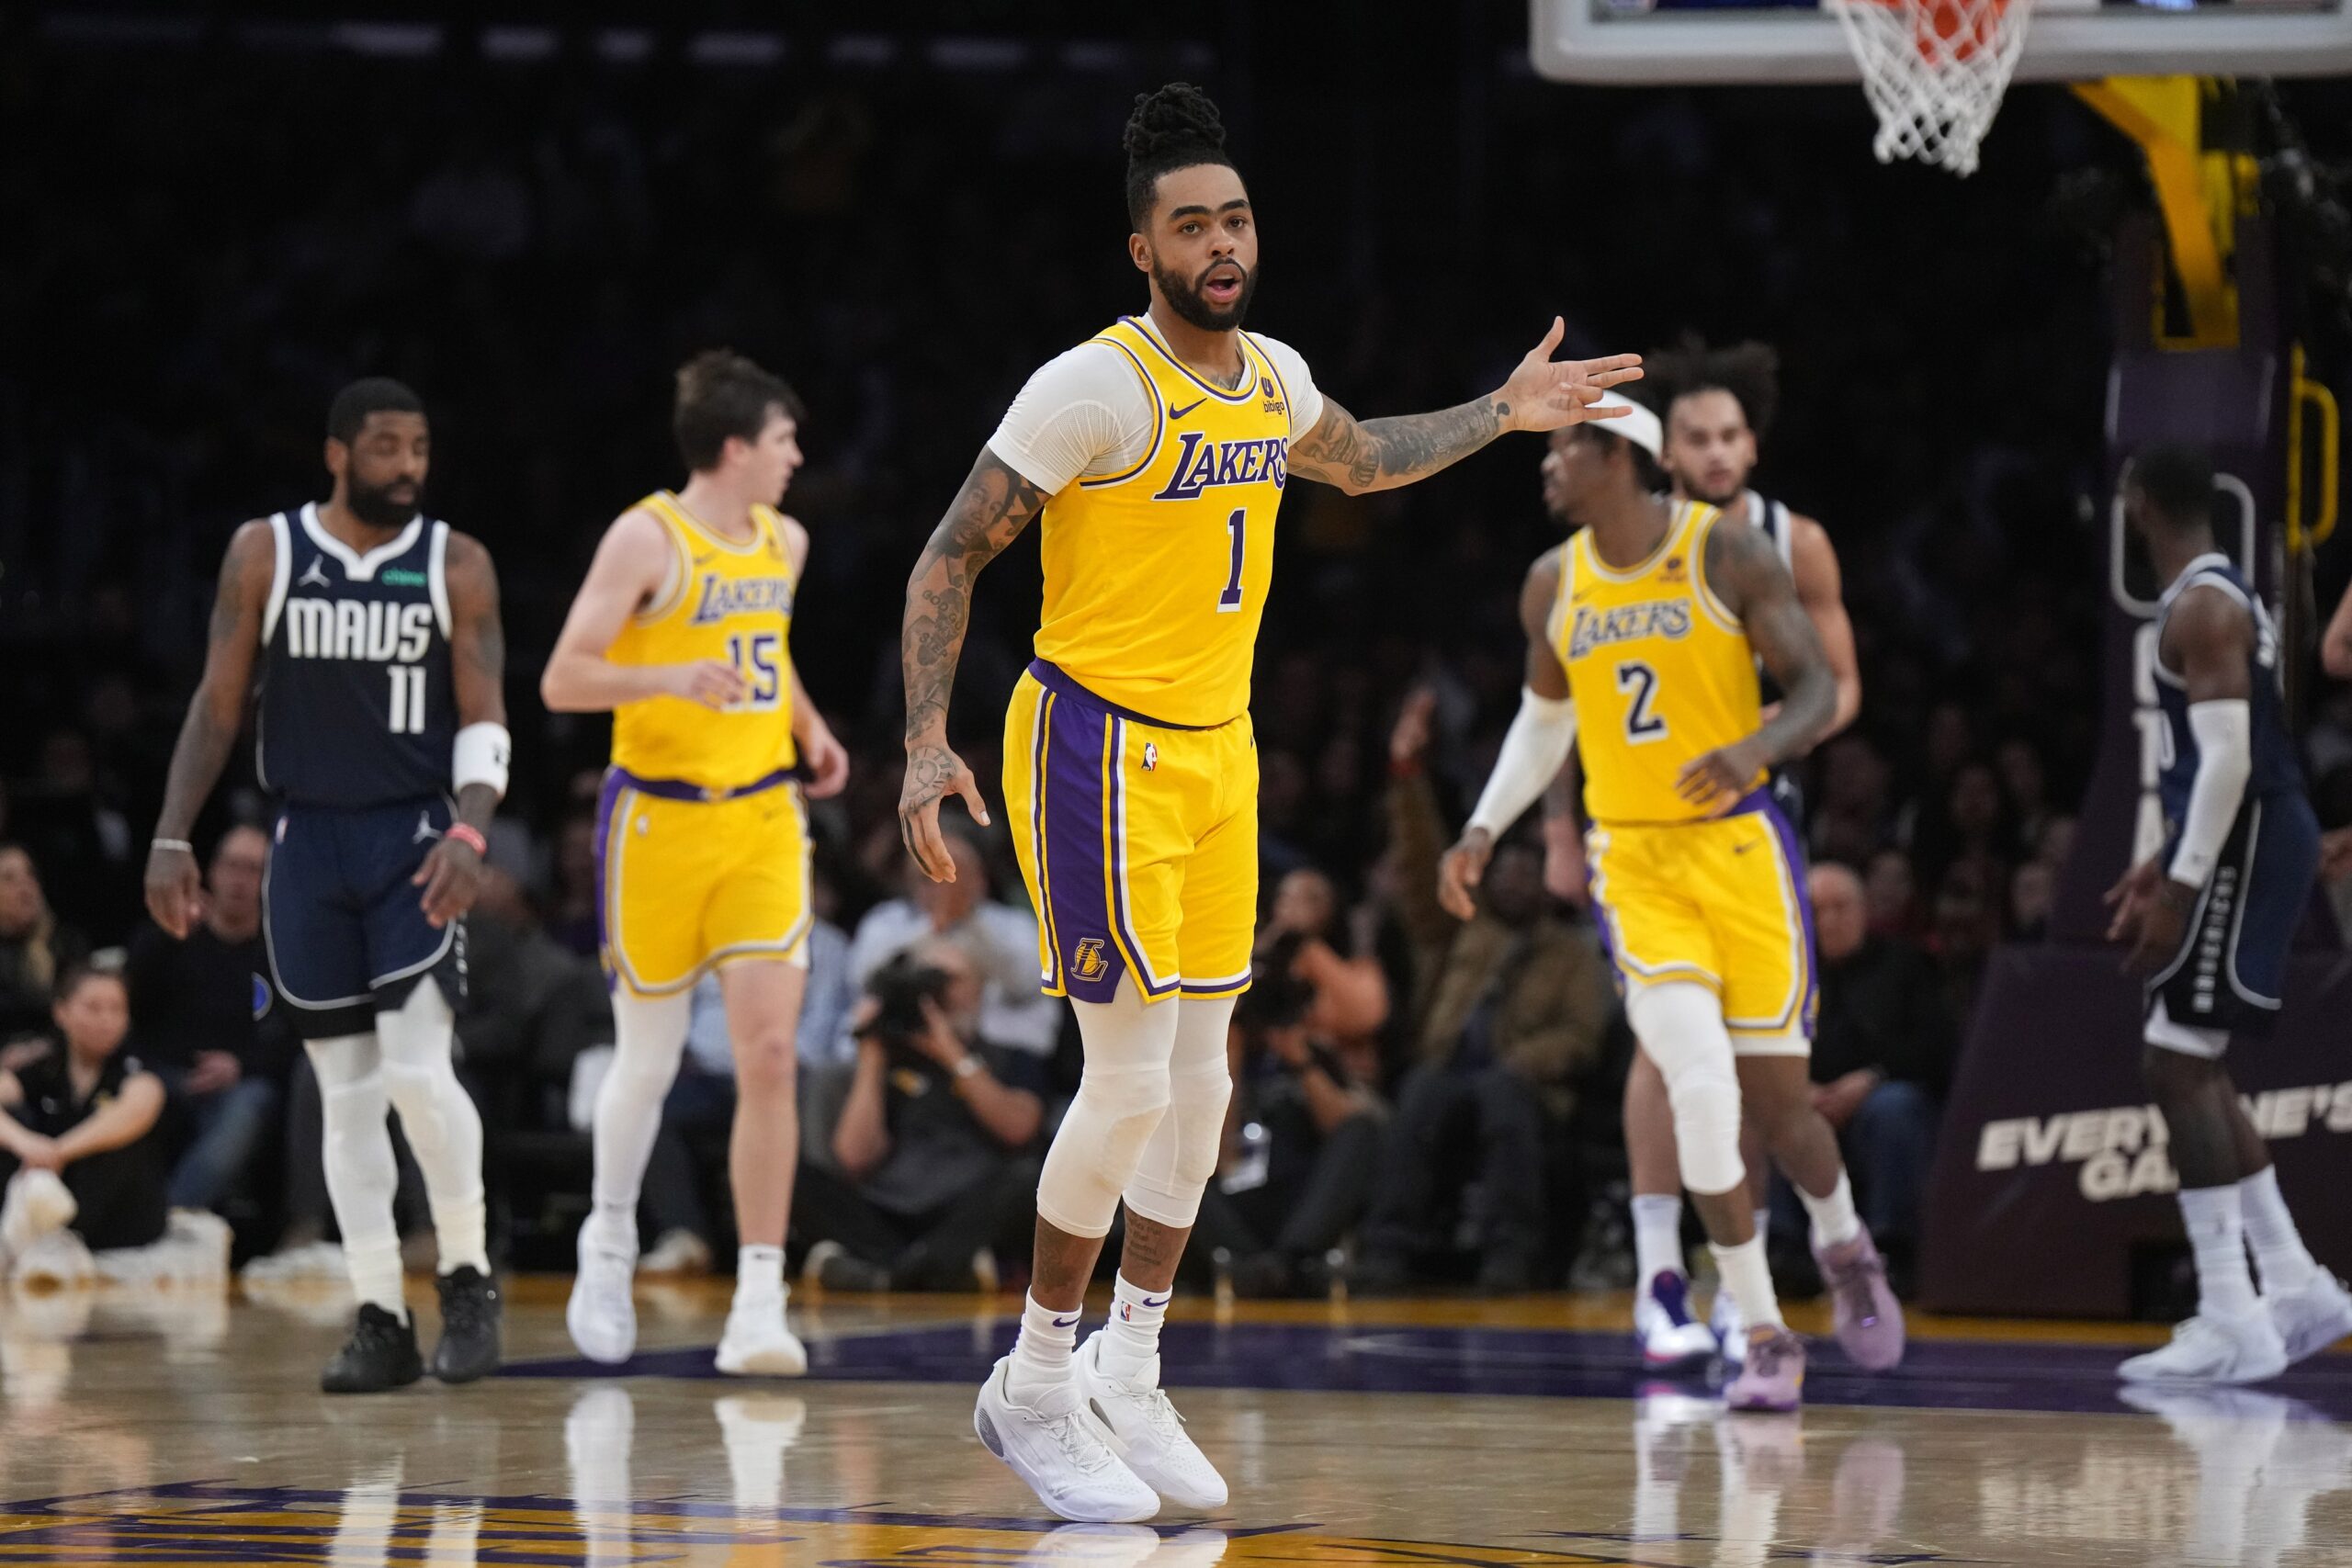 Los Angeles Lakers guard D'Angelo Russell (1) gestures after a three-point basket against the Dallas Mavericks in the first half at Crypto.com Arena.